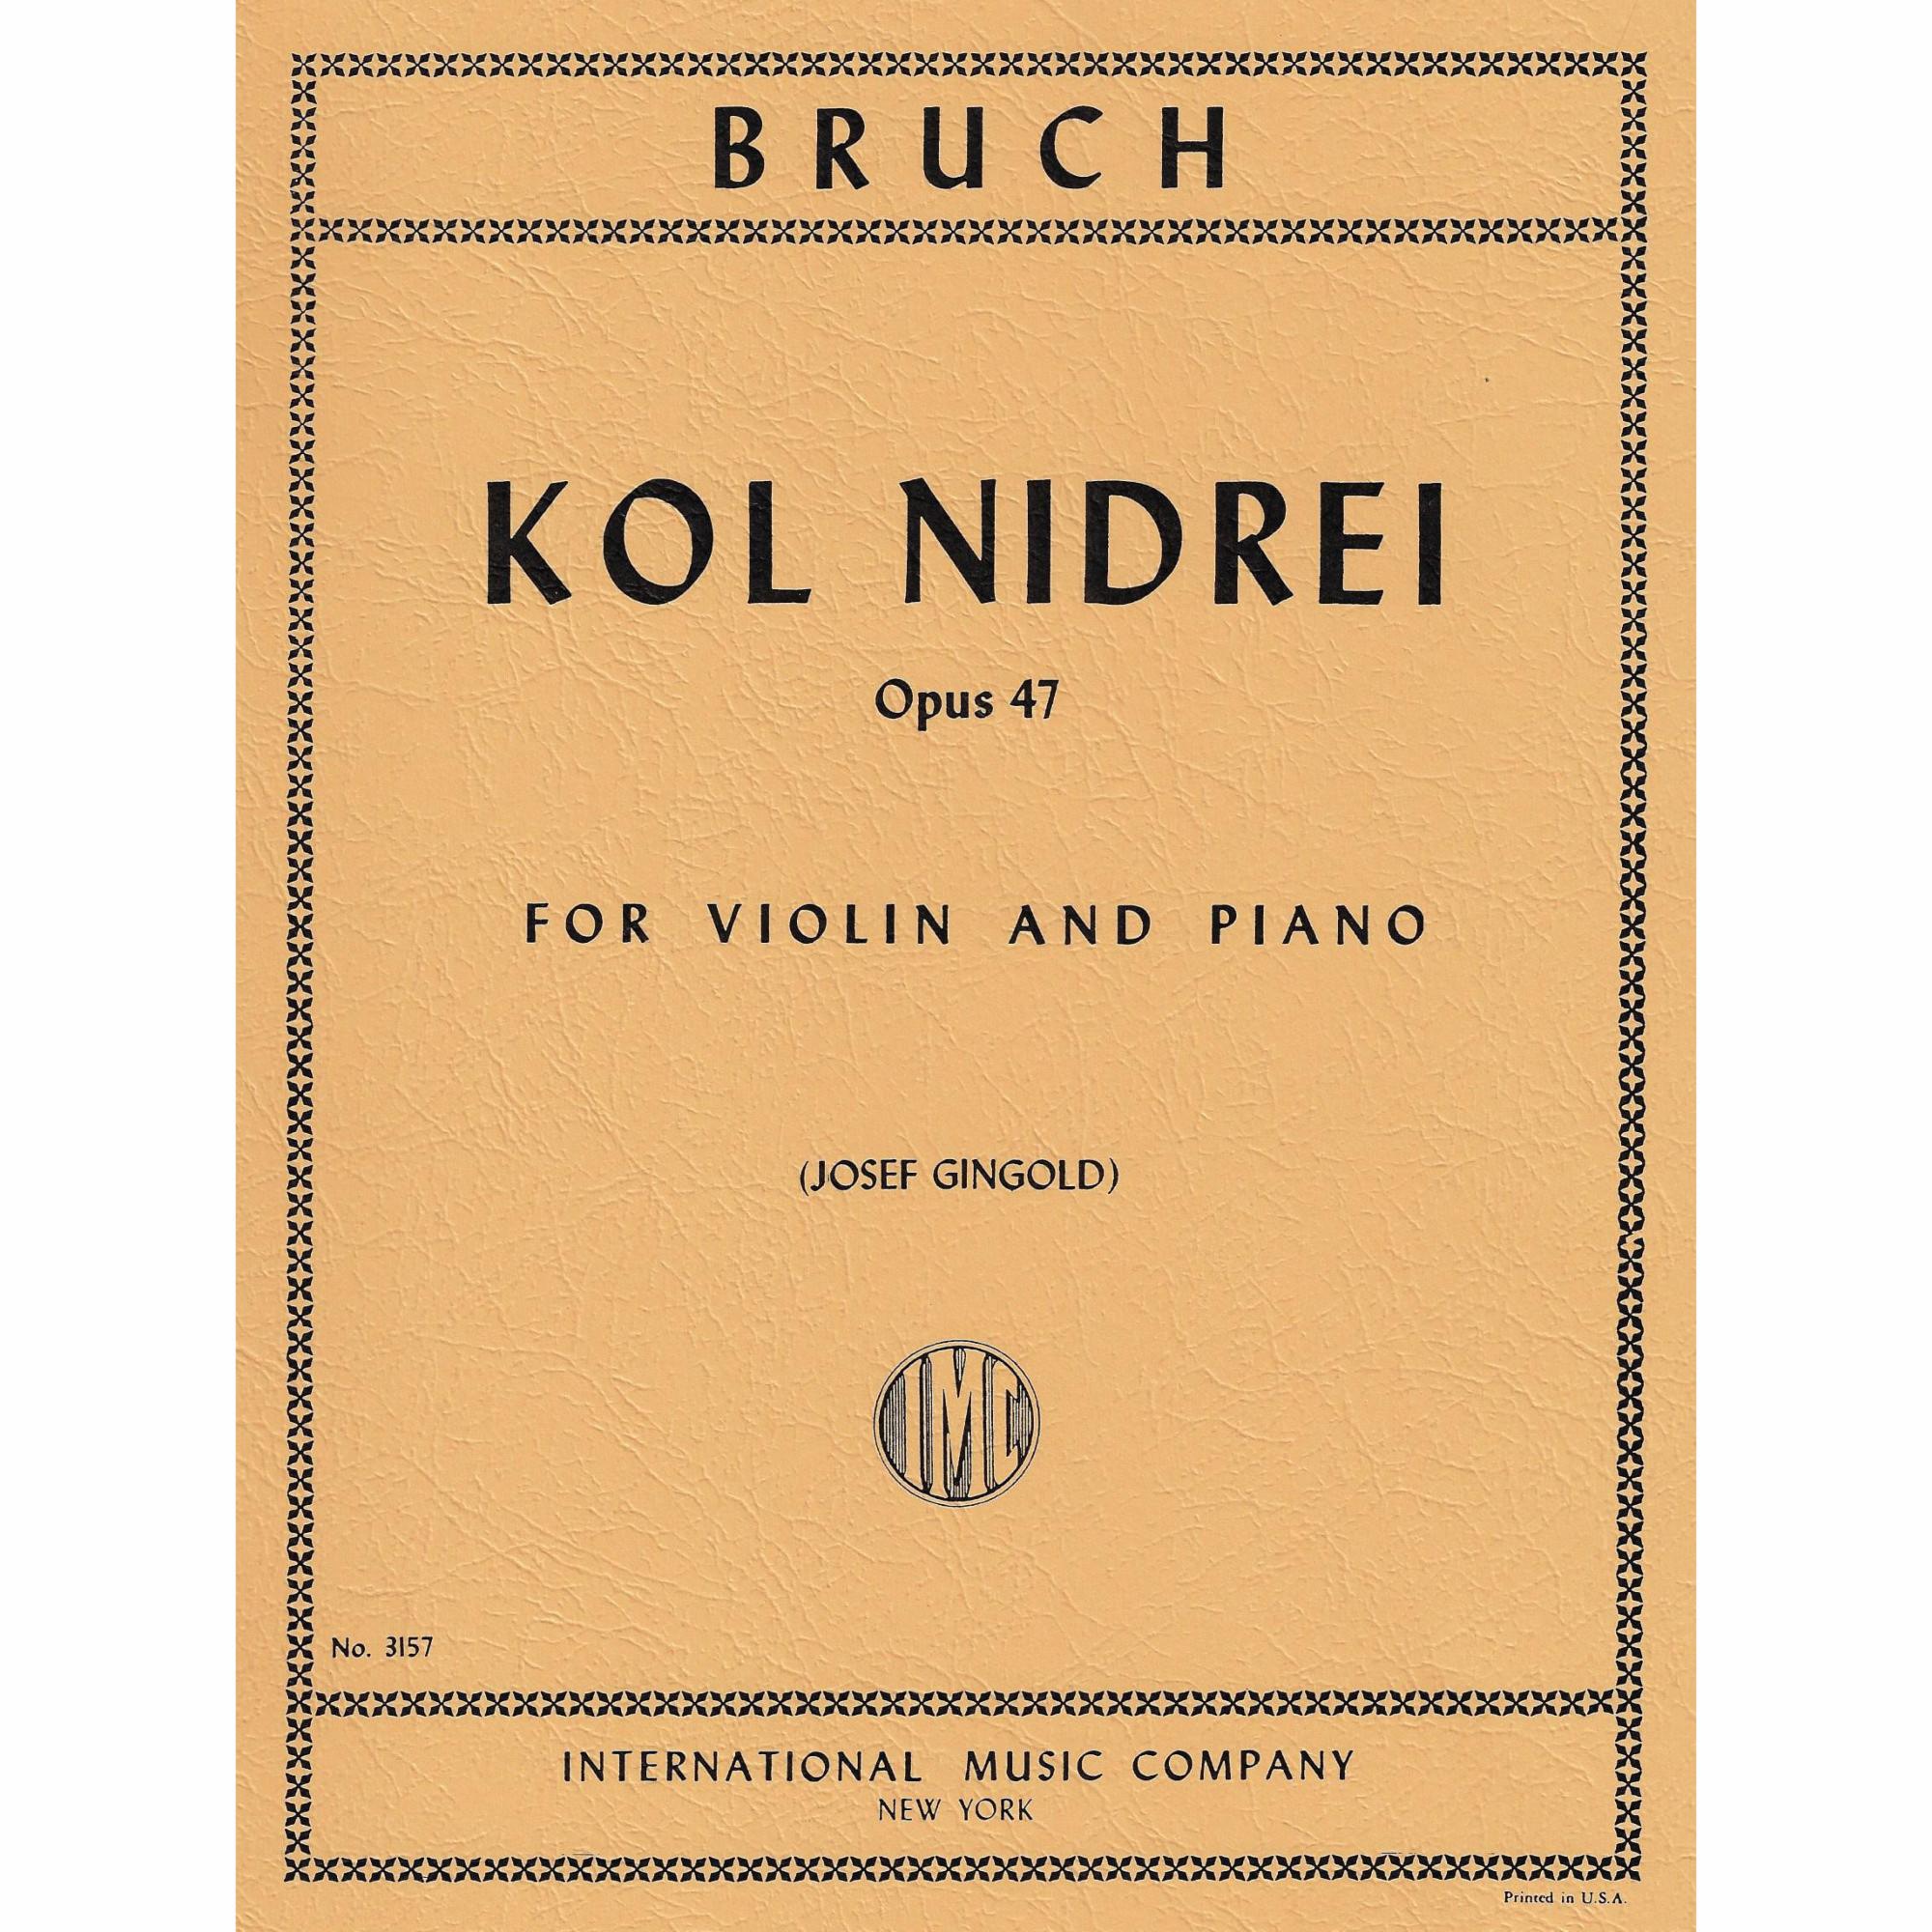 Bruch -- Kol Nidre, Op. 47 for Violin and Piano